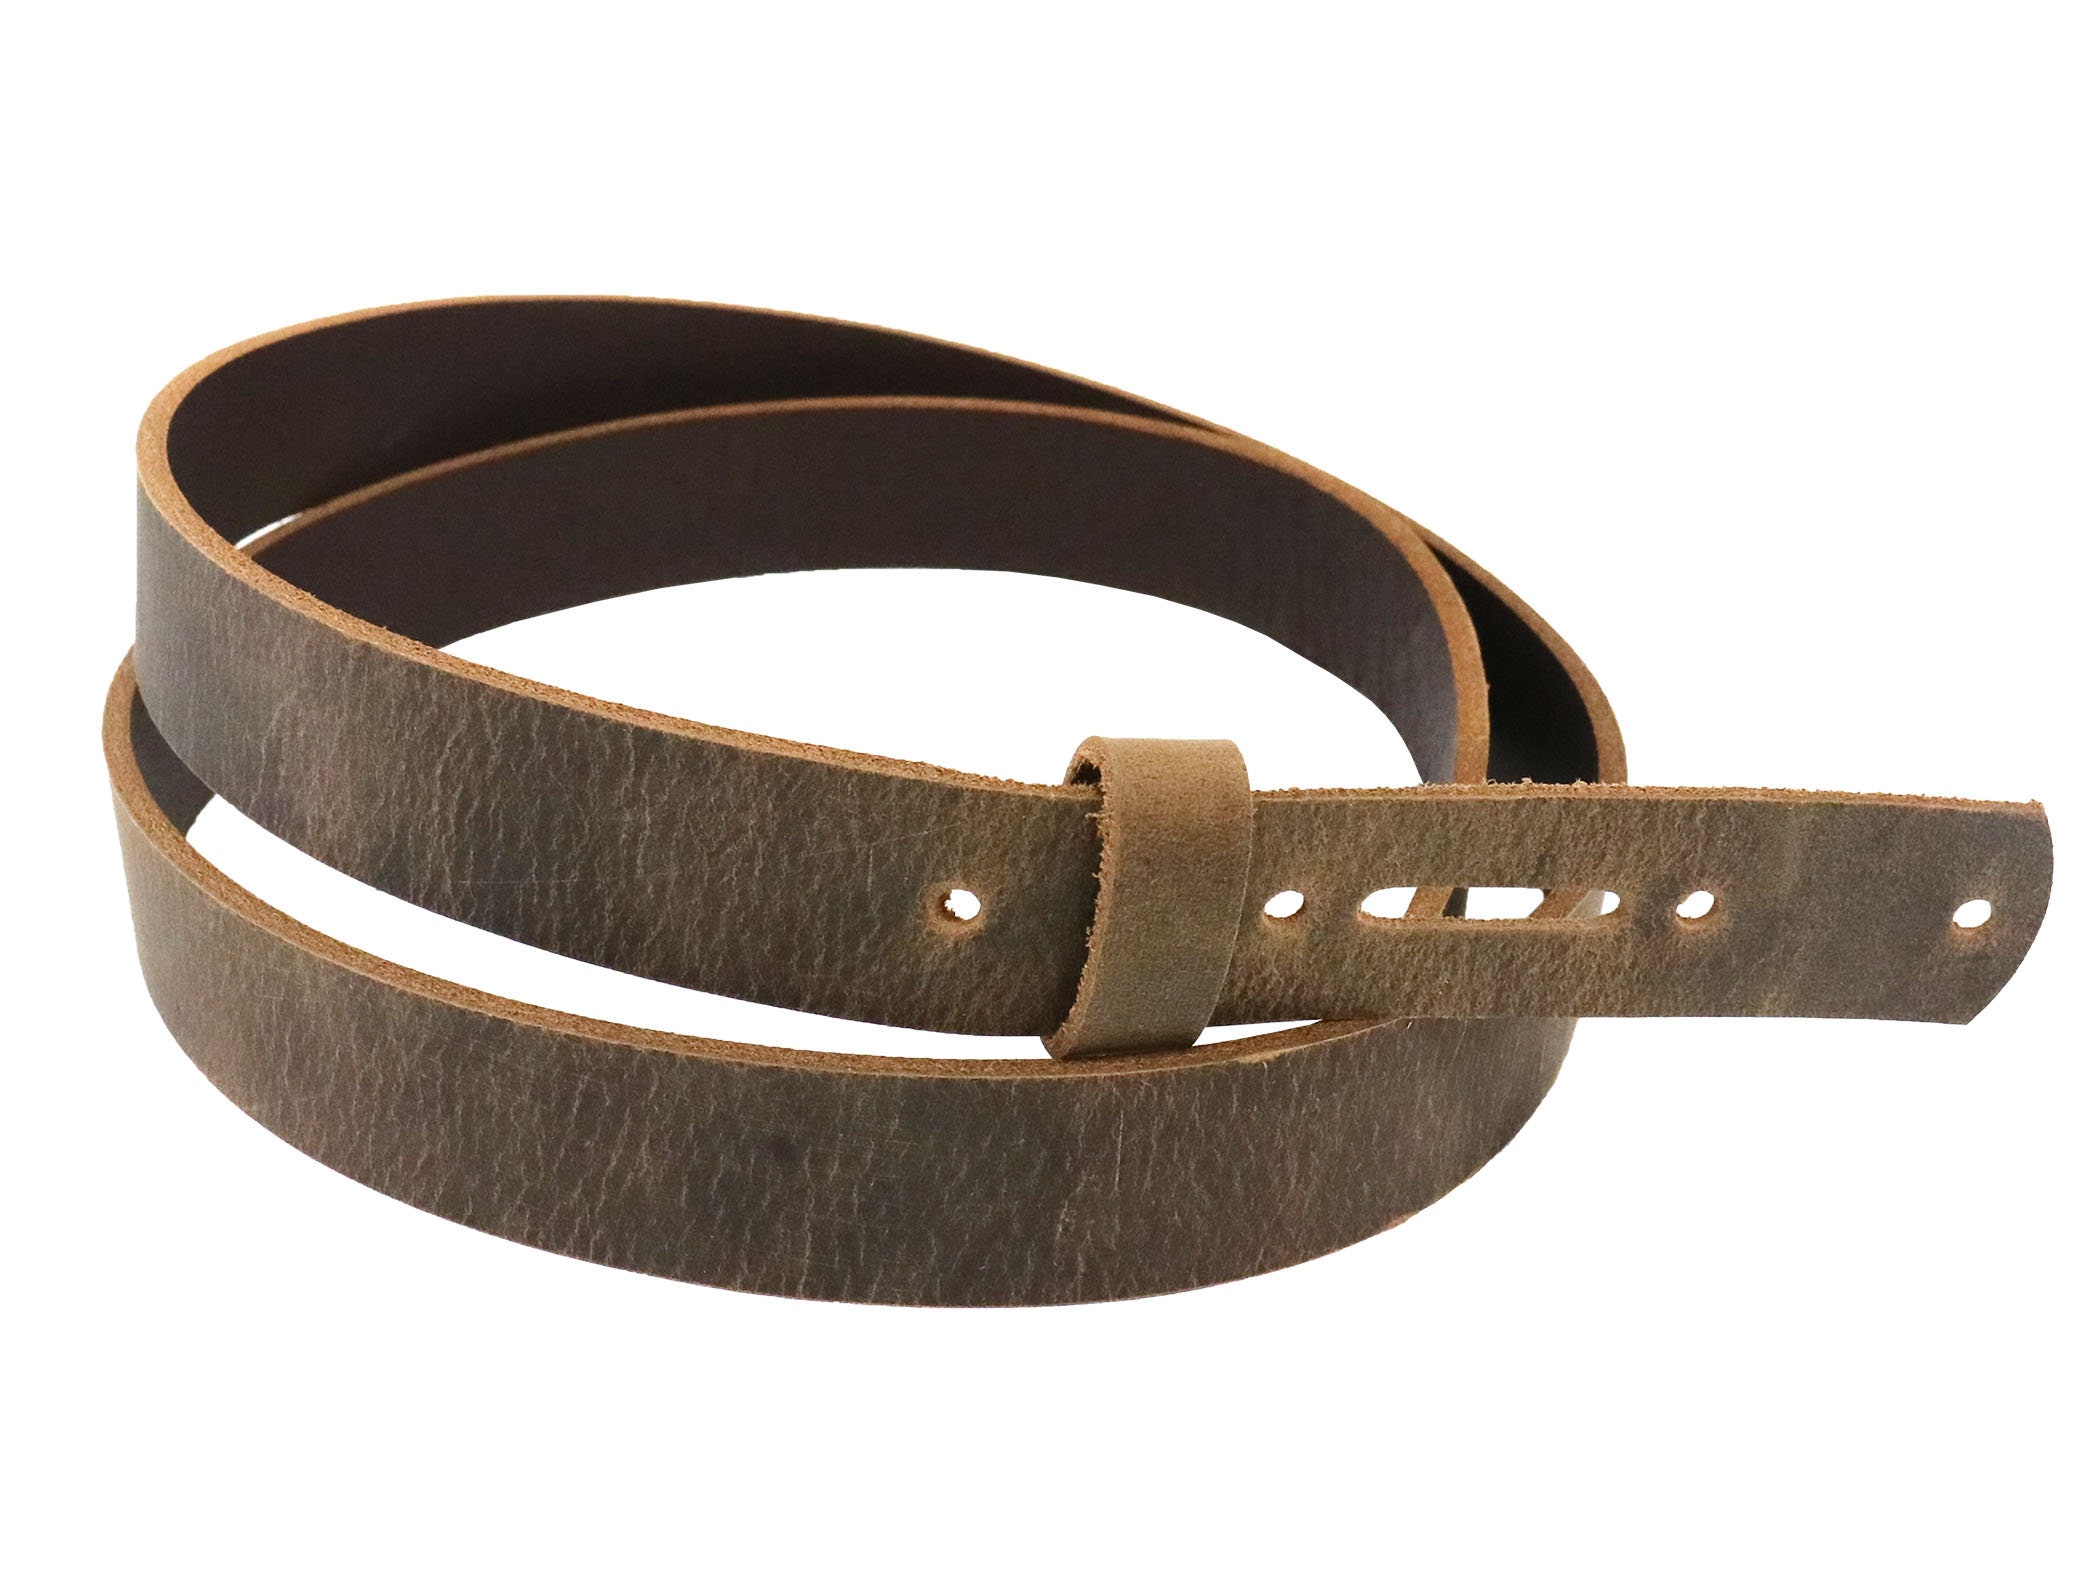 1-1/2 Brown Buffalo Leather Belt Blank with Snap Holes 8/9 oz